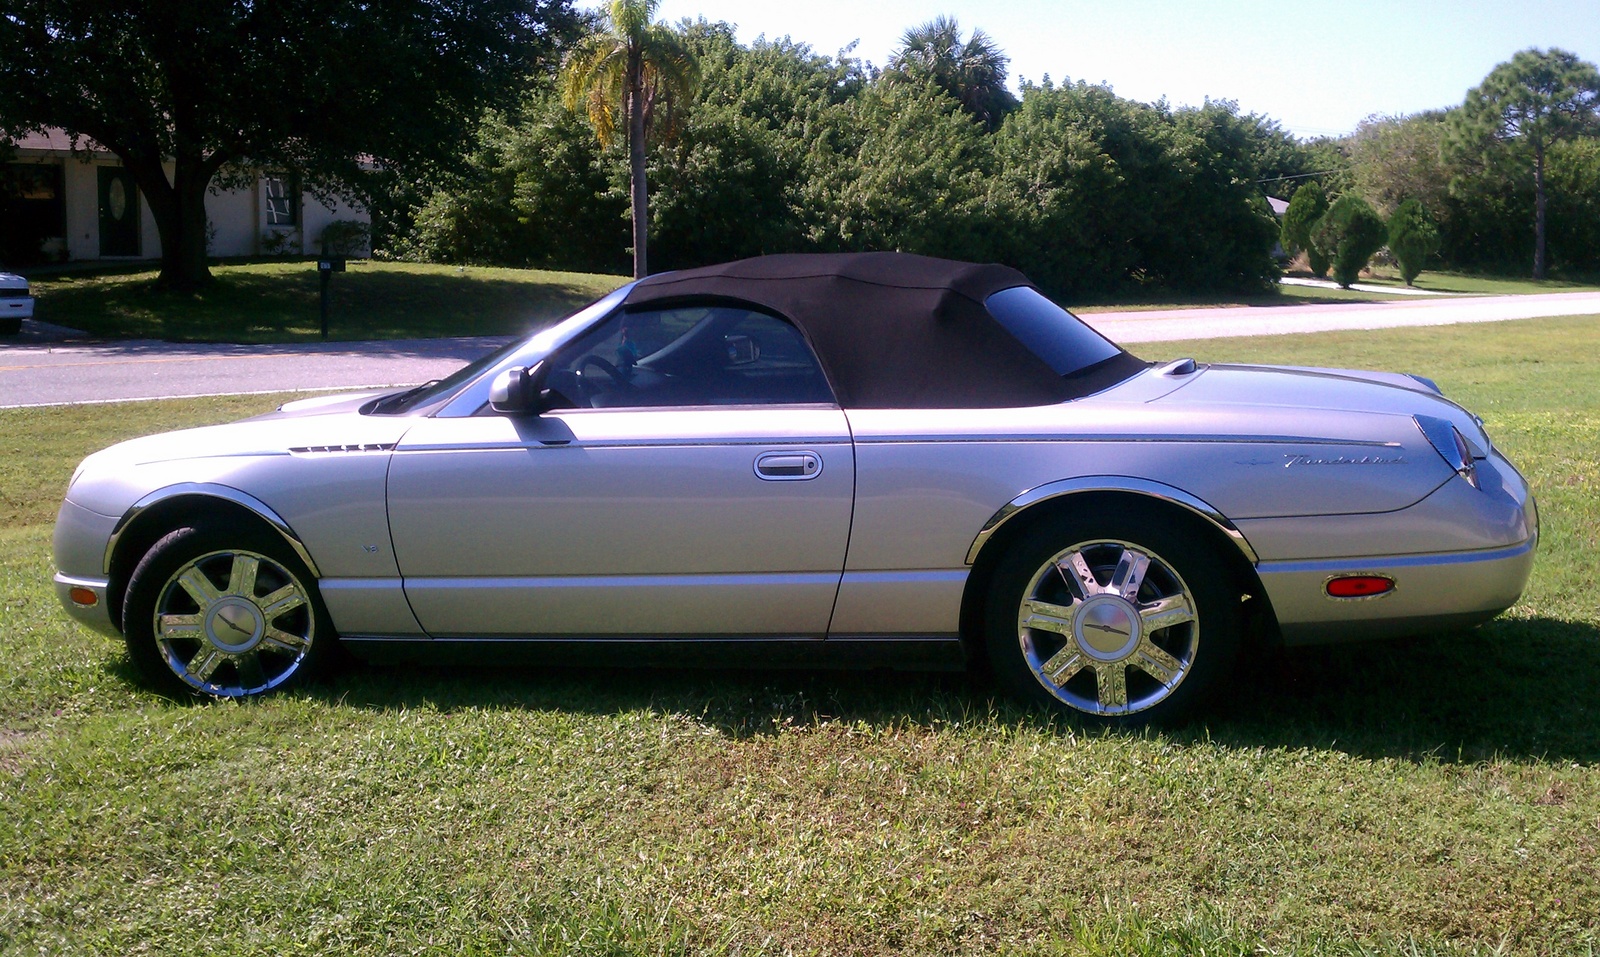 2004 Ford thunderbird convertible review #4